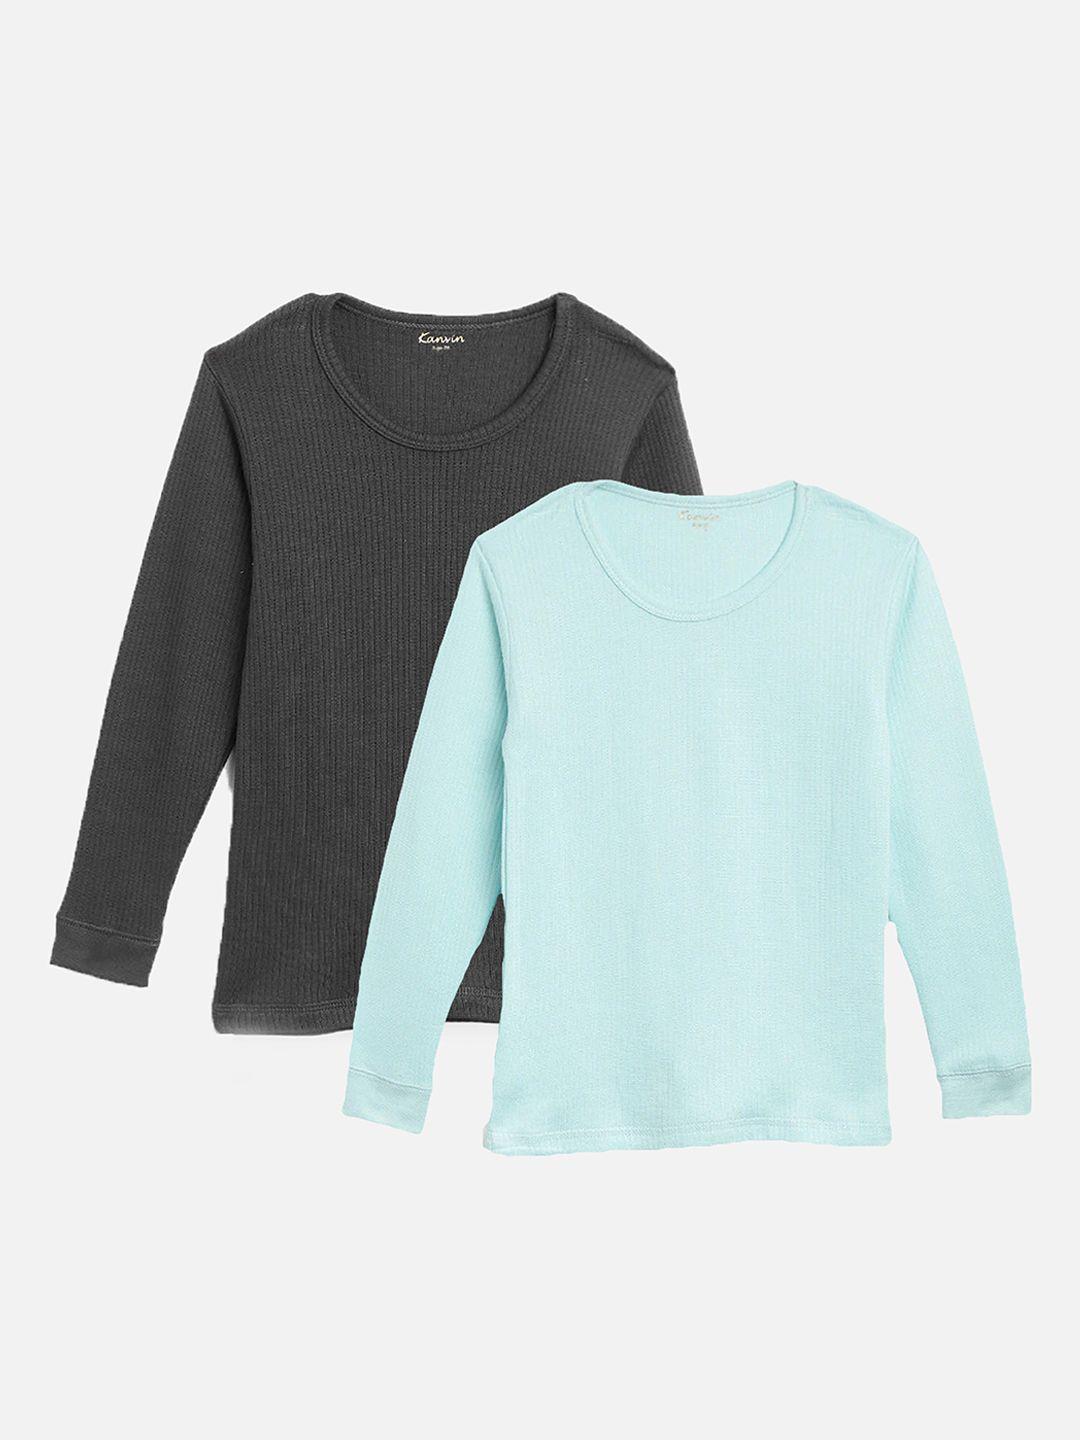 kanvin boys pack of 2 charcoal & turquoise ribbed cotton thermal tops